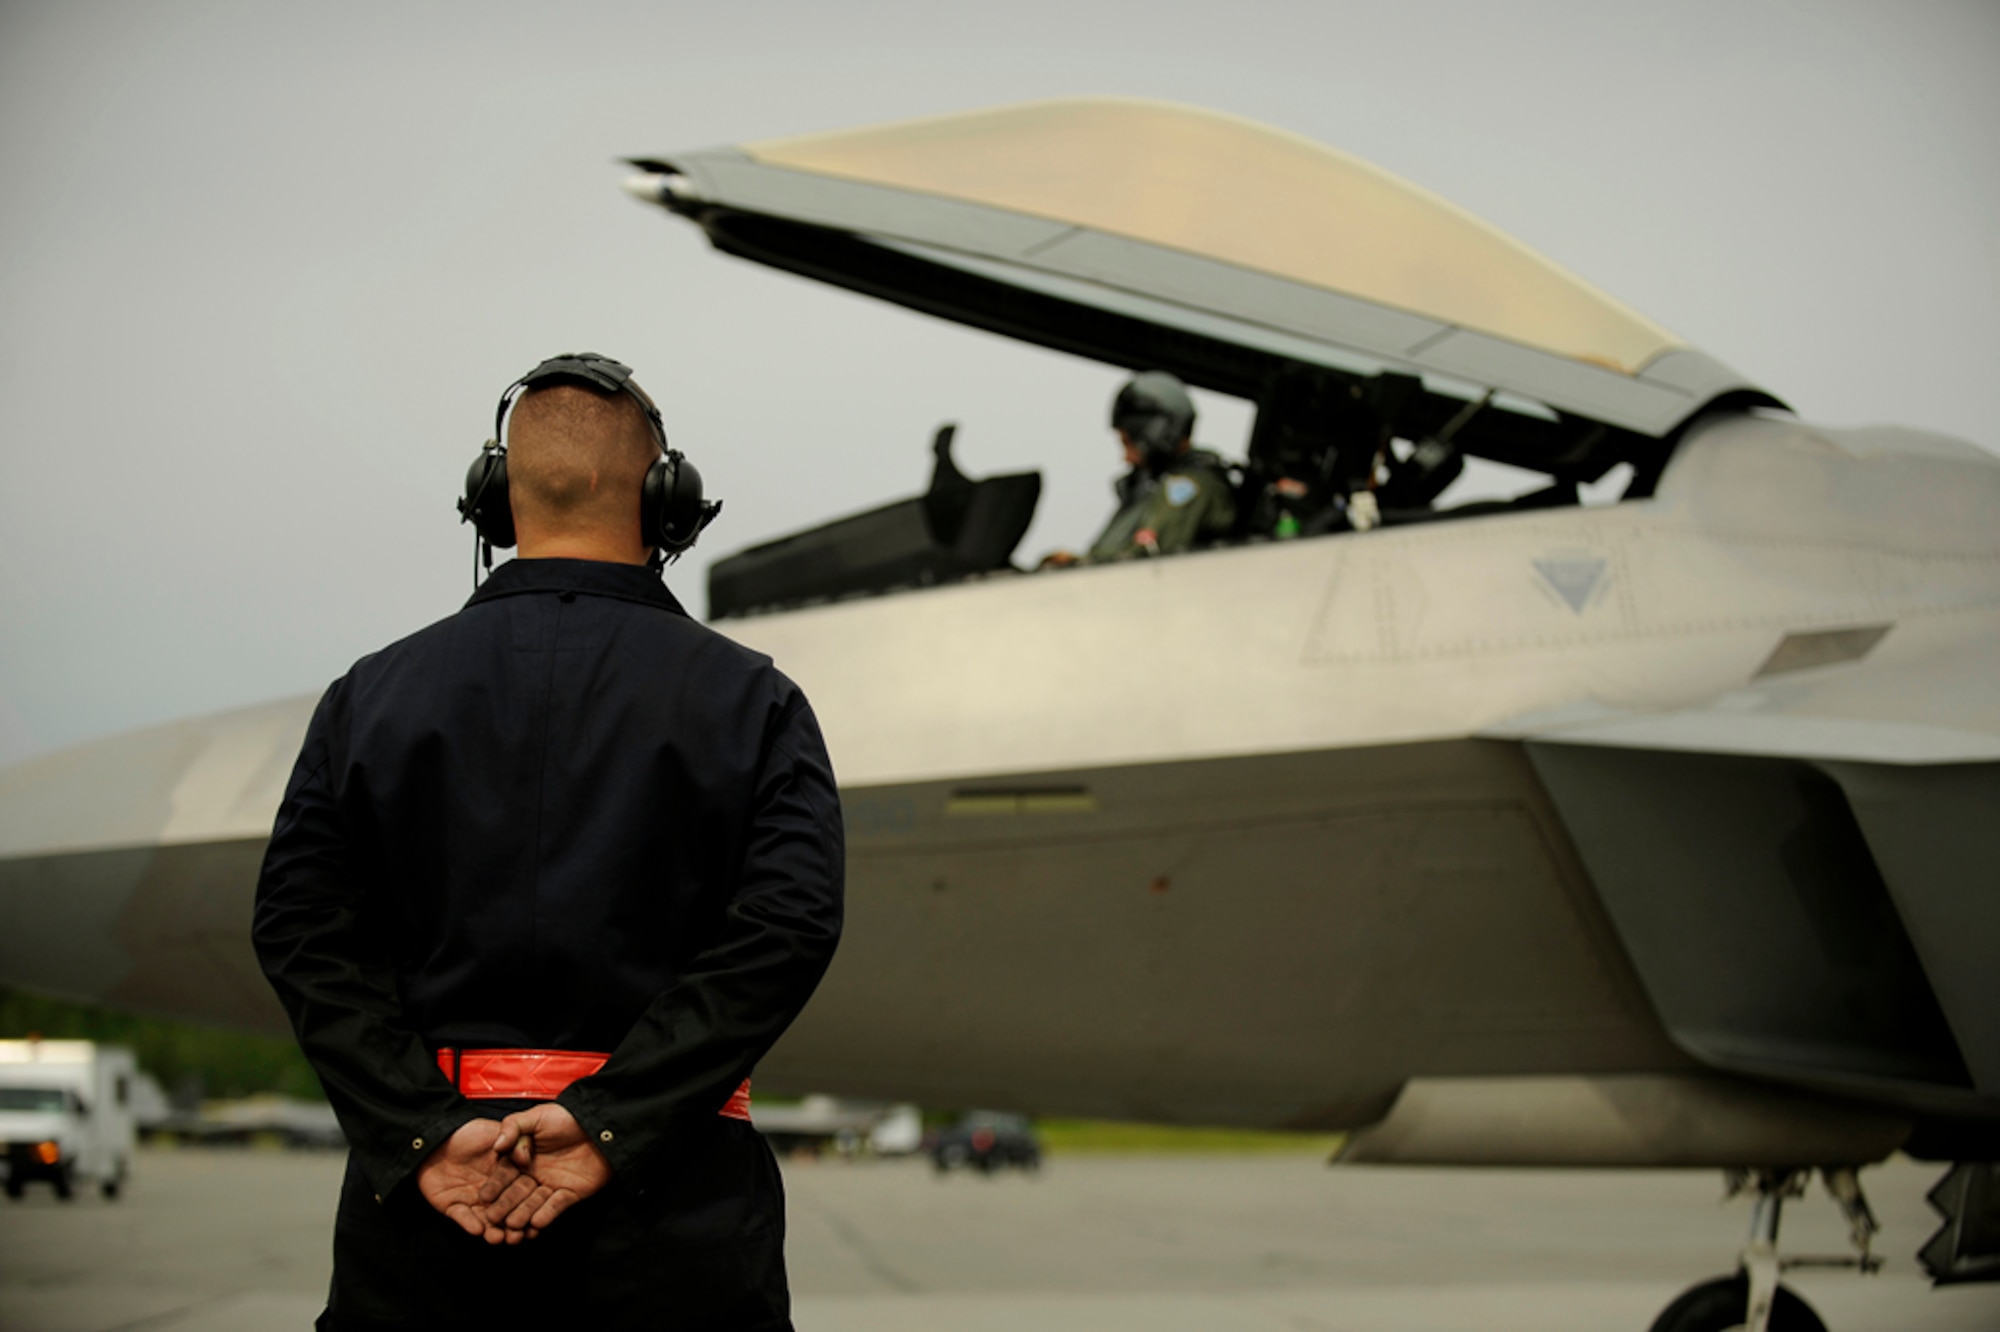 Airman 1st Class Holden Coladonato from the 90th Fighter Squadron, Elmendorf AFB, Alaska, prepares a F-22 Raptor for take off during exercise Northern Edge 2009, Elmendorf AFB, Alaska, June 17, 2009.  Northern Edge 2009 is Alaska's largest military training exercise.  It prepares joint forces to respond to crises throughout the Asia-Pacific region.  (Released/U.S. Air Force photo by TSgt Dennis J. Henry Jr.)
